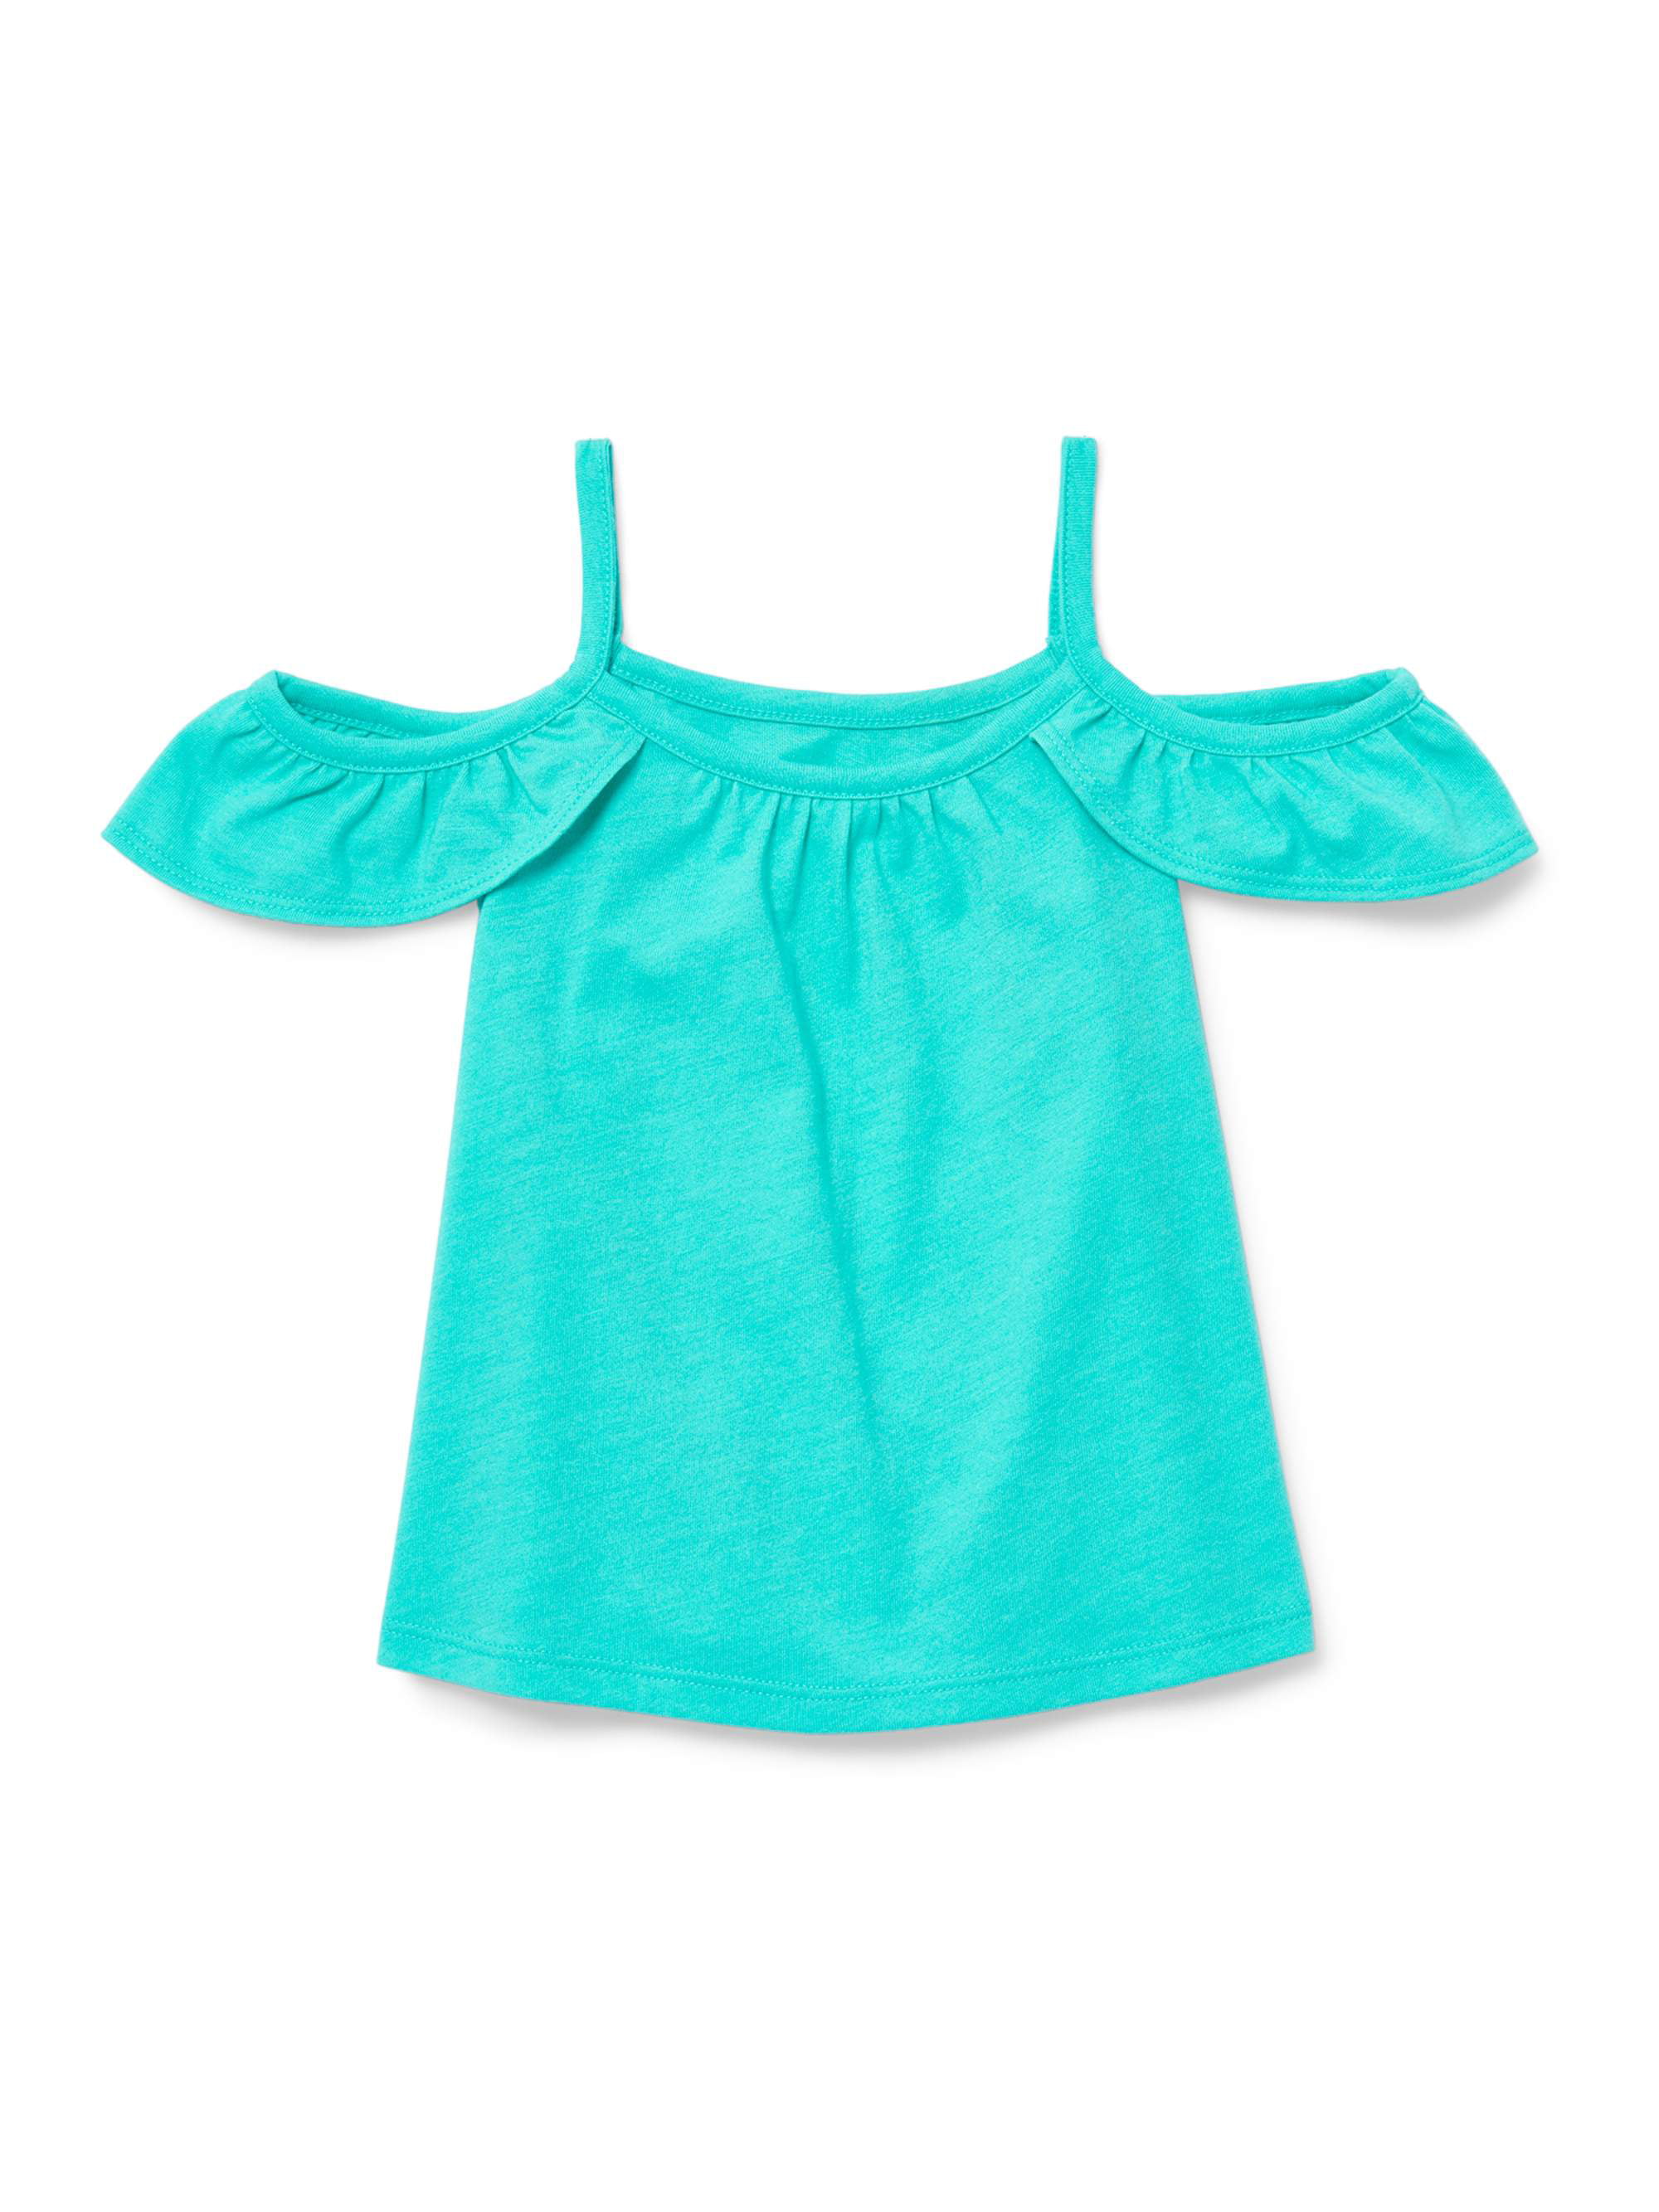 The Children's Place Toddler Girls' Cold Shoulder Ruffle Tank Top ...